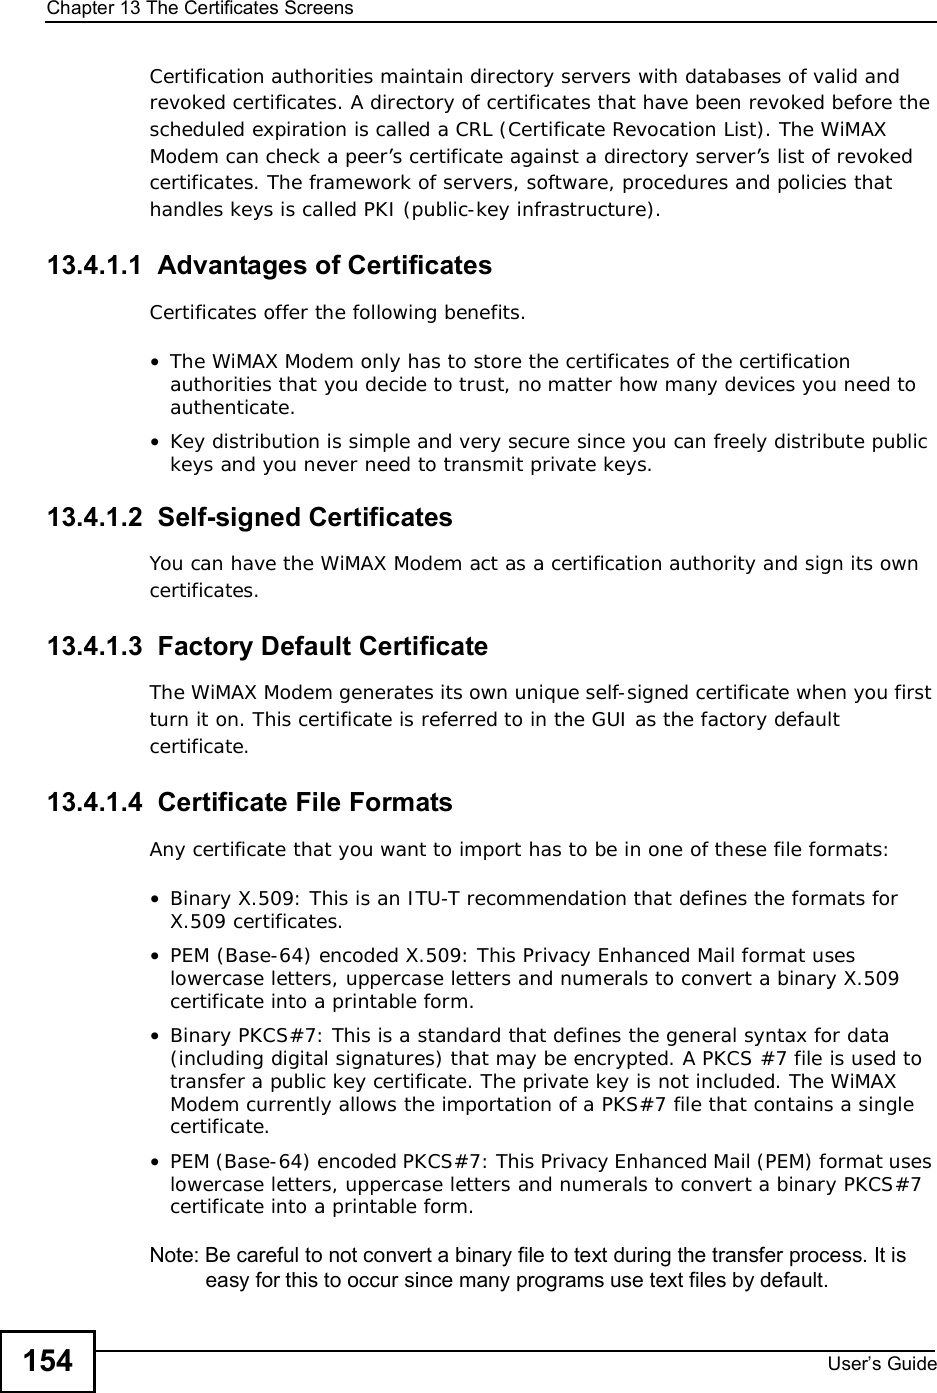 Chapter 13The Certificates ScreensUser s Guide154Certification authorities maintain directory servers with databases of valid and revoked certificates. A directory of certificates that have been revoked before the scheduled expiration is called a CRL (Certificate Revocation List). The WiMAX Modem can check a peer’s certificate against a directory server’s list of revoked certificates. The framework of servers, software, procedures and policies that handles keys is called PKI (public-key infrastructure).13.4.1.1  Advantages of CertificatesCertificates offer the following benefits.•The WiMAX Modem only has to store the certificates of the certification authorities that you decide to trust, no matter how many devices you need to authenticate. •Key distribution is simple and very secure since you can freely distribute public keys and you never need to transmit private keys.13.4.1.2  Self-signed CertificatesYou can have the WiMAX Modem act as a certification authority and sign its own certificates.13.4.1.3  Factory Default CertificateThe WiMAX Modem generates its own unique self-signed certificate when you first turn it on. This certificate is referred to in the GUI as the factory default certificate. 13.4.1.4  Certificate File FormatsAny certificate that you want to import has to be in one of these file formats:•Binary X.509: This is an ITU-T recommendation that defines the formats for X.509 certificates.•PEM (Base-64) encoded X.509: This Privacy Enhanced Mail format uses lowercase letters, uppercase letters and numerals to convert a binary X.509 certificate into a printable form.•Binary PKCS#7: This is a standard that defines the general syntax for data (including digital signatures) that may be encrypted. A PKCS #7 file is used to transfer a public key certificate. The private key is not included. The WiMAX Modem currently allows the importation of a PKS#7 file that contains a single certificate. •PEM (Base-64) encoded PKCS#7: This Privacy Enhanced Mail (PEM) format uses lowercase letters, uppercase letters and numerals to convert a binary PKCS#7 certificate into a printable form.Note: Be careful to not convert a binary file to text during the transfer process. It is easy for this to occur since many programs use text files by default. 